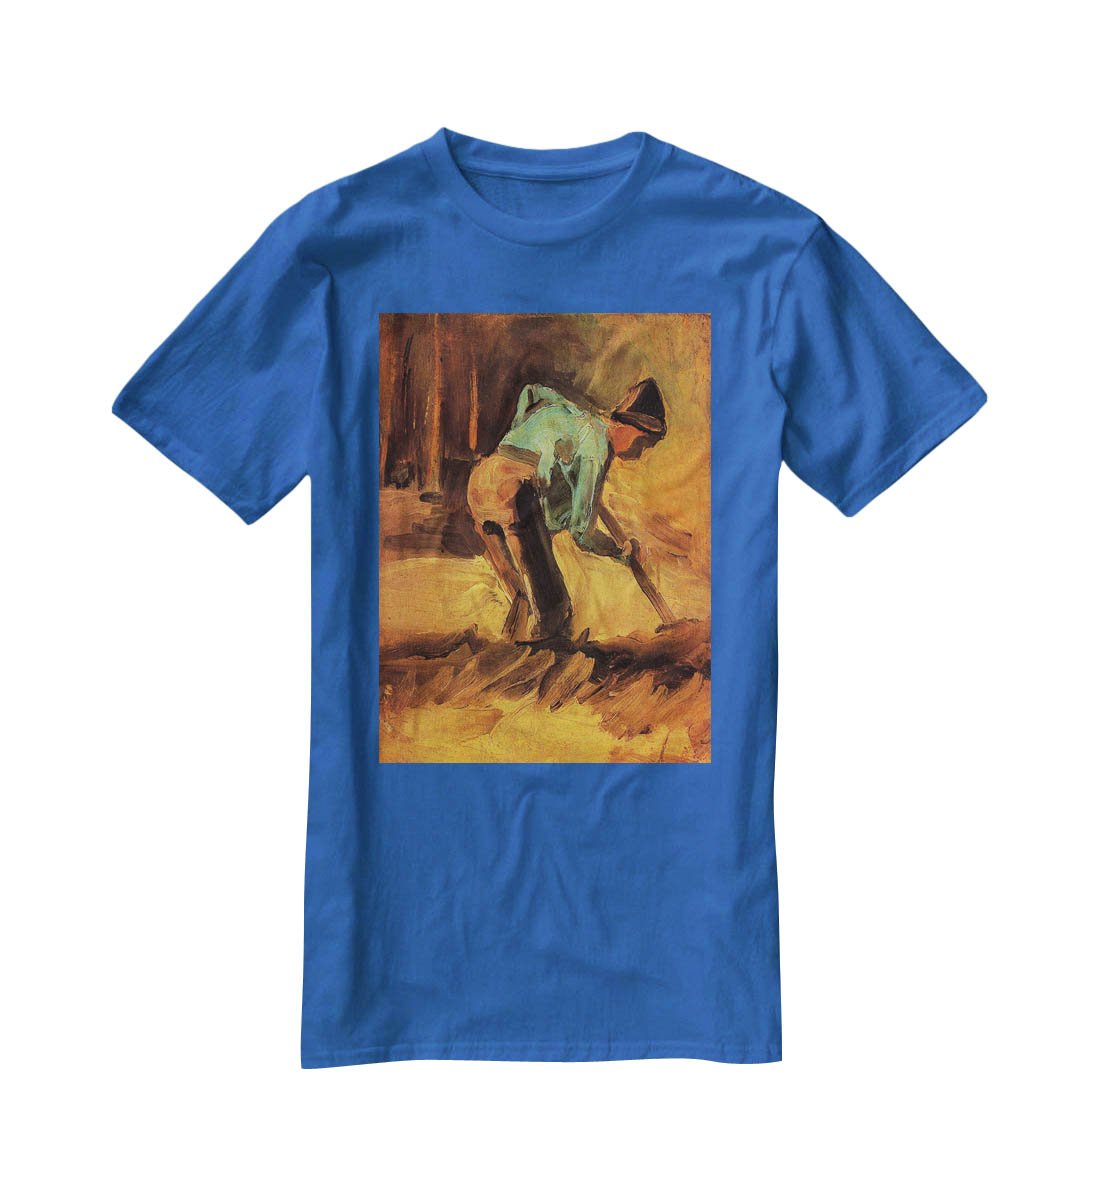 Man Stooping with Stick or Spade by Van Gogh T-Shirt - Canvas Art Rocks - 2